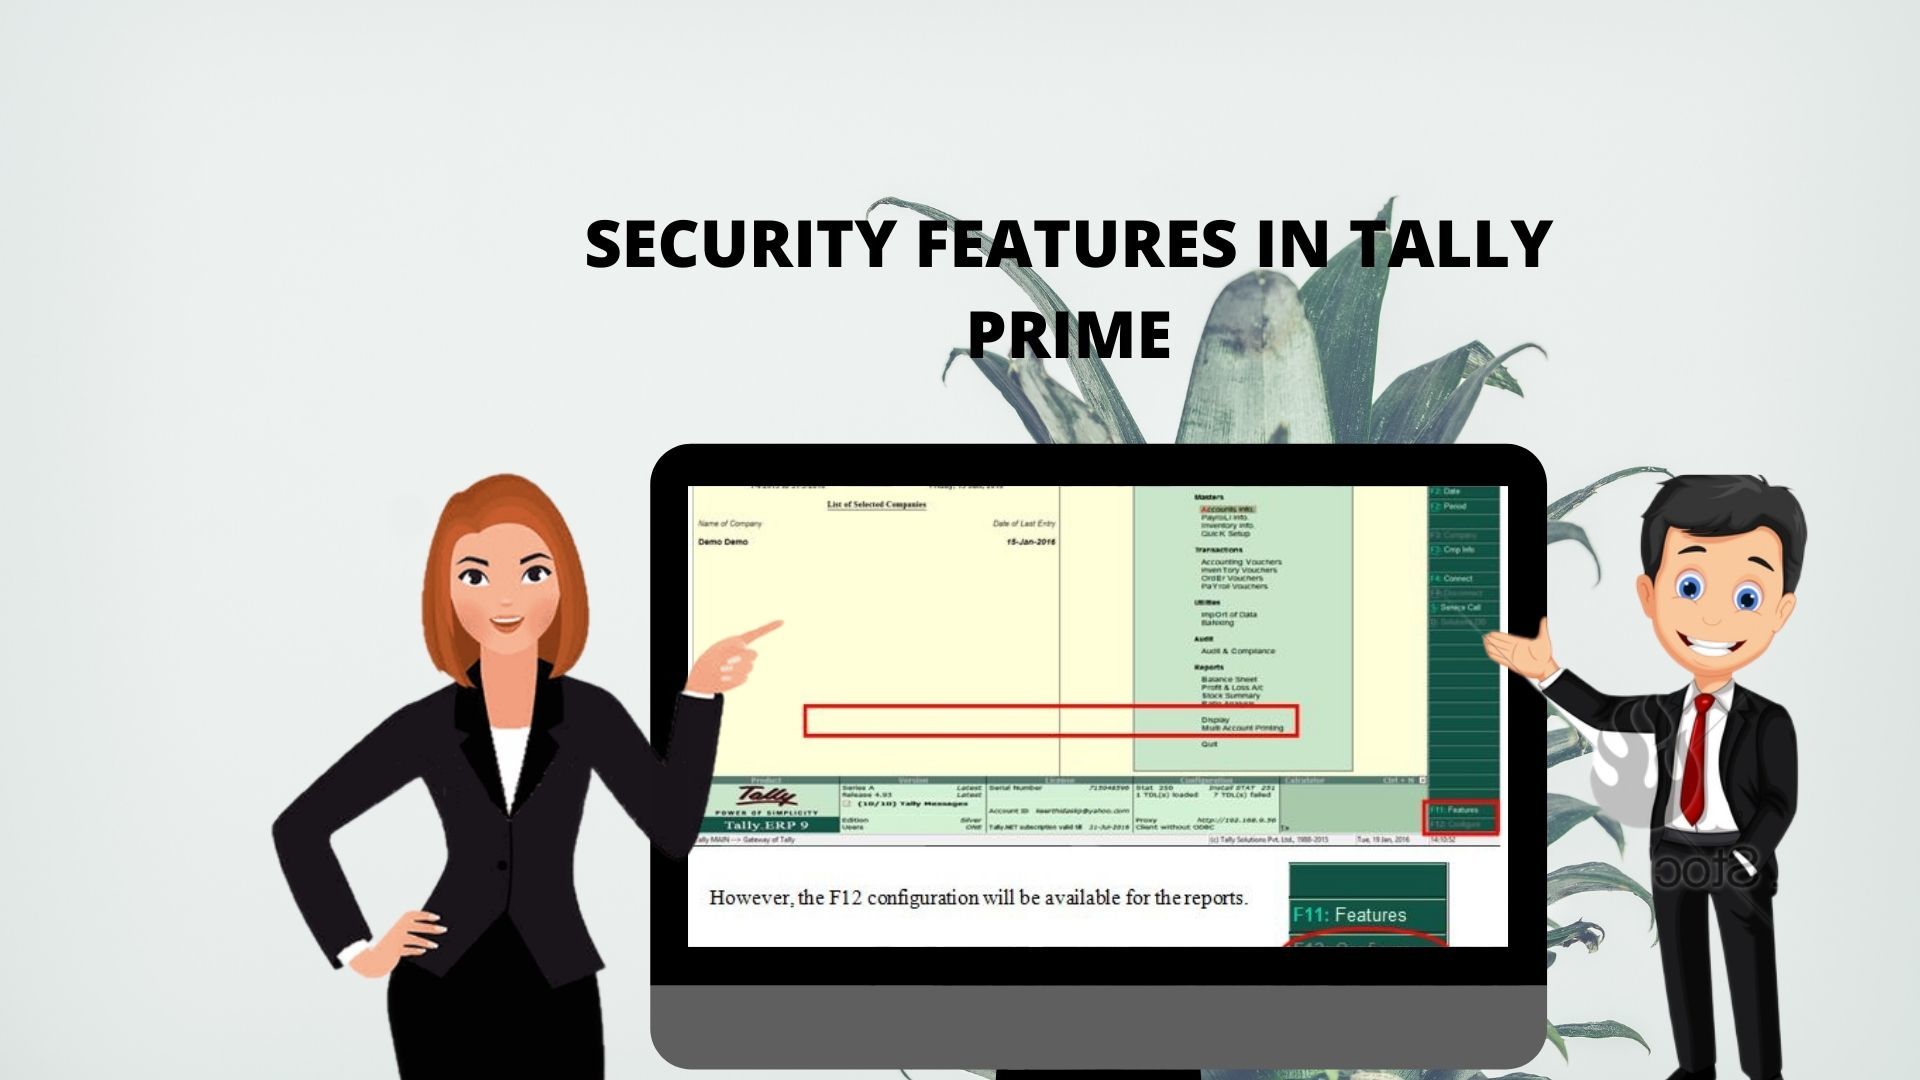 SECURITY FEATURES